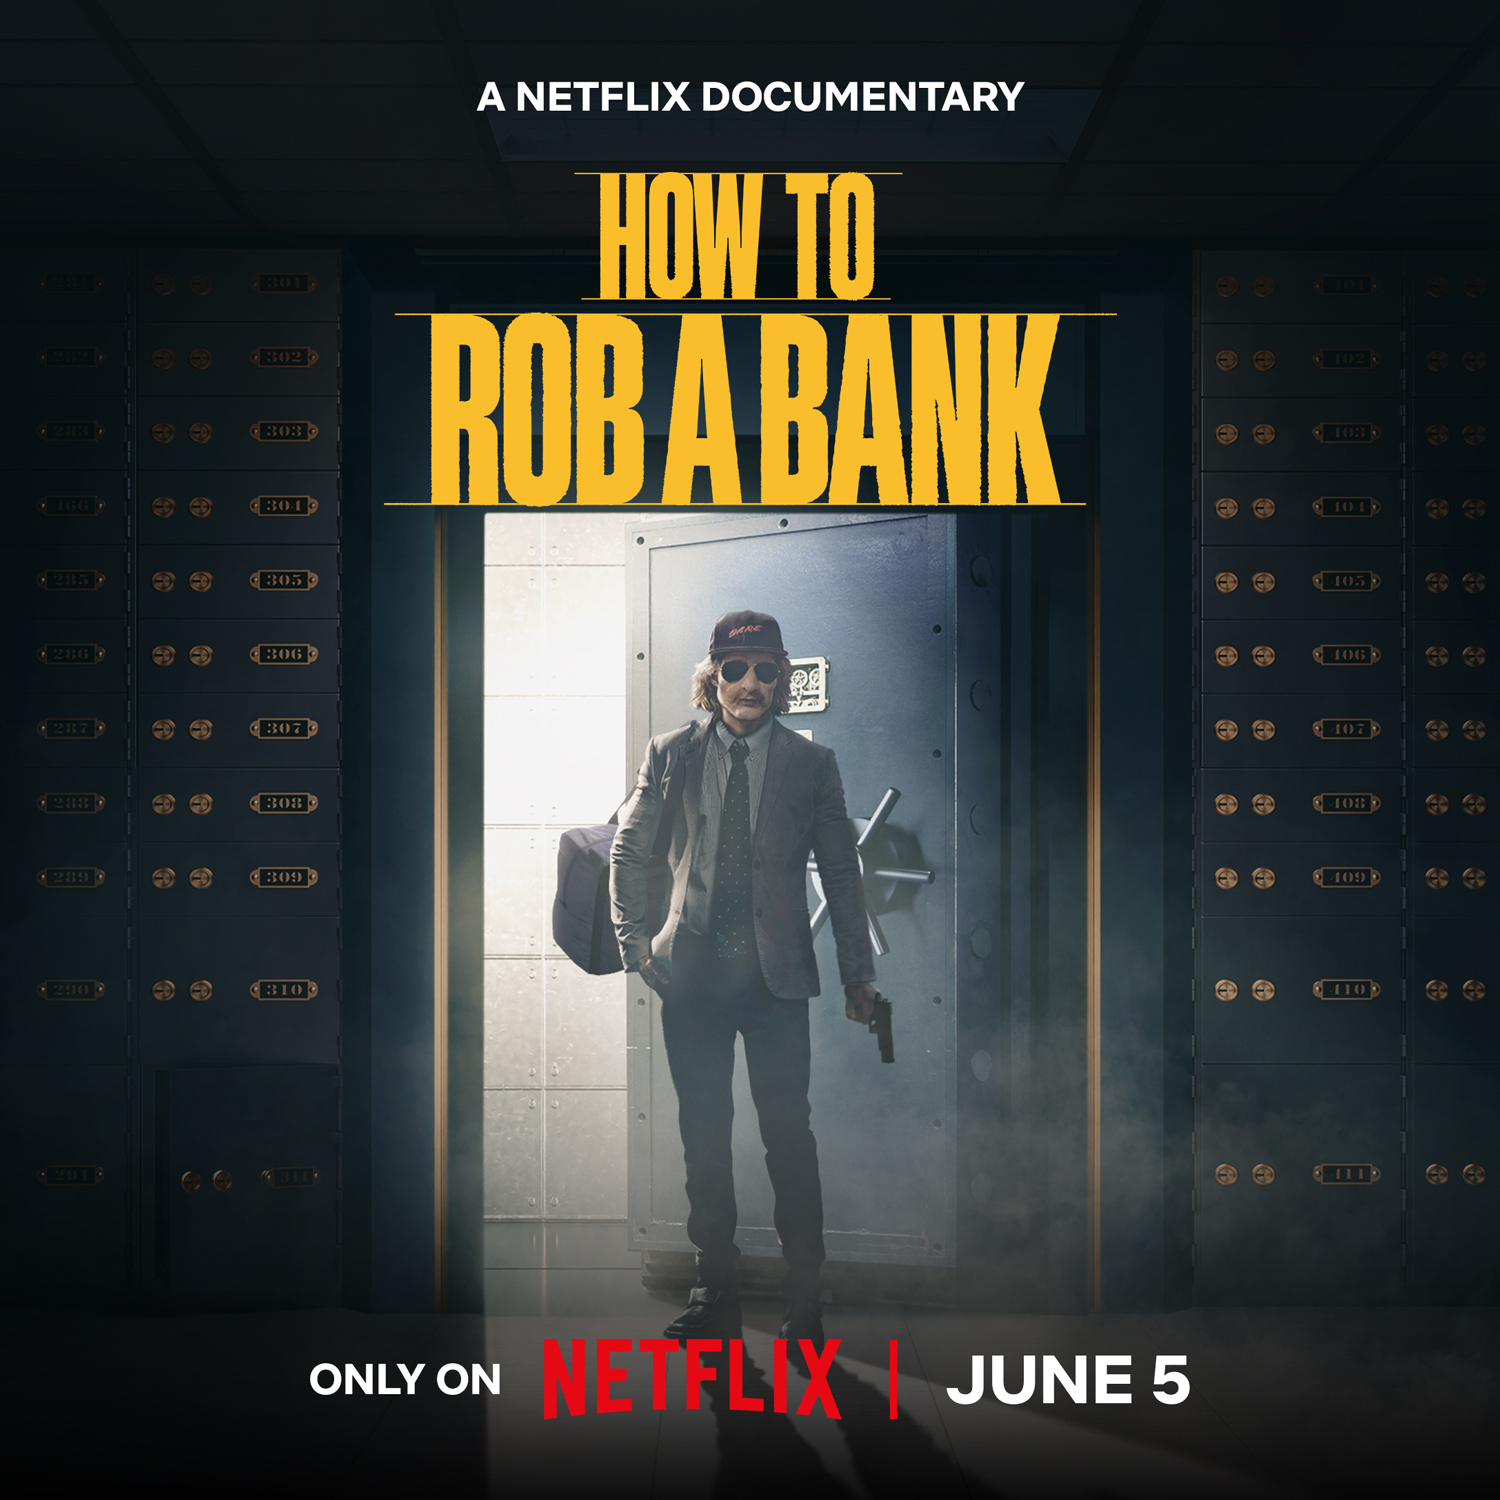 Netflix Shares Trailer For 'How To Rob A Bank'